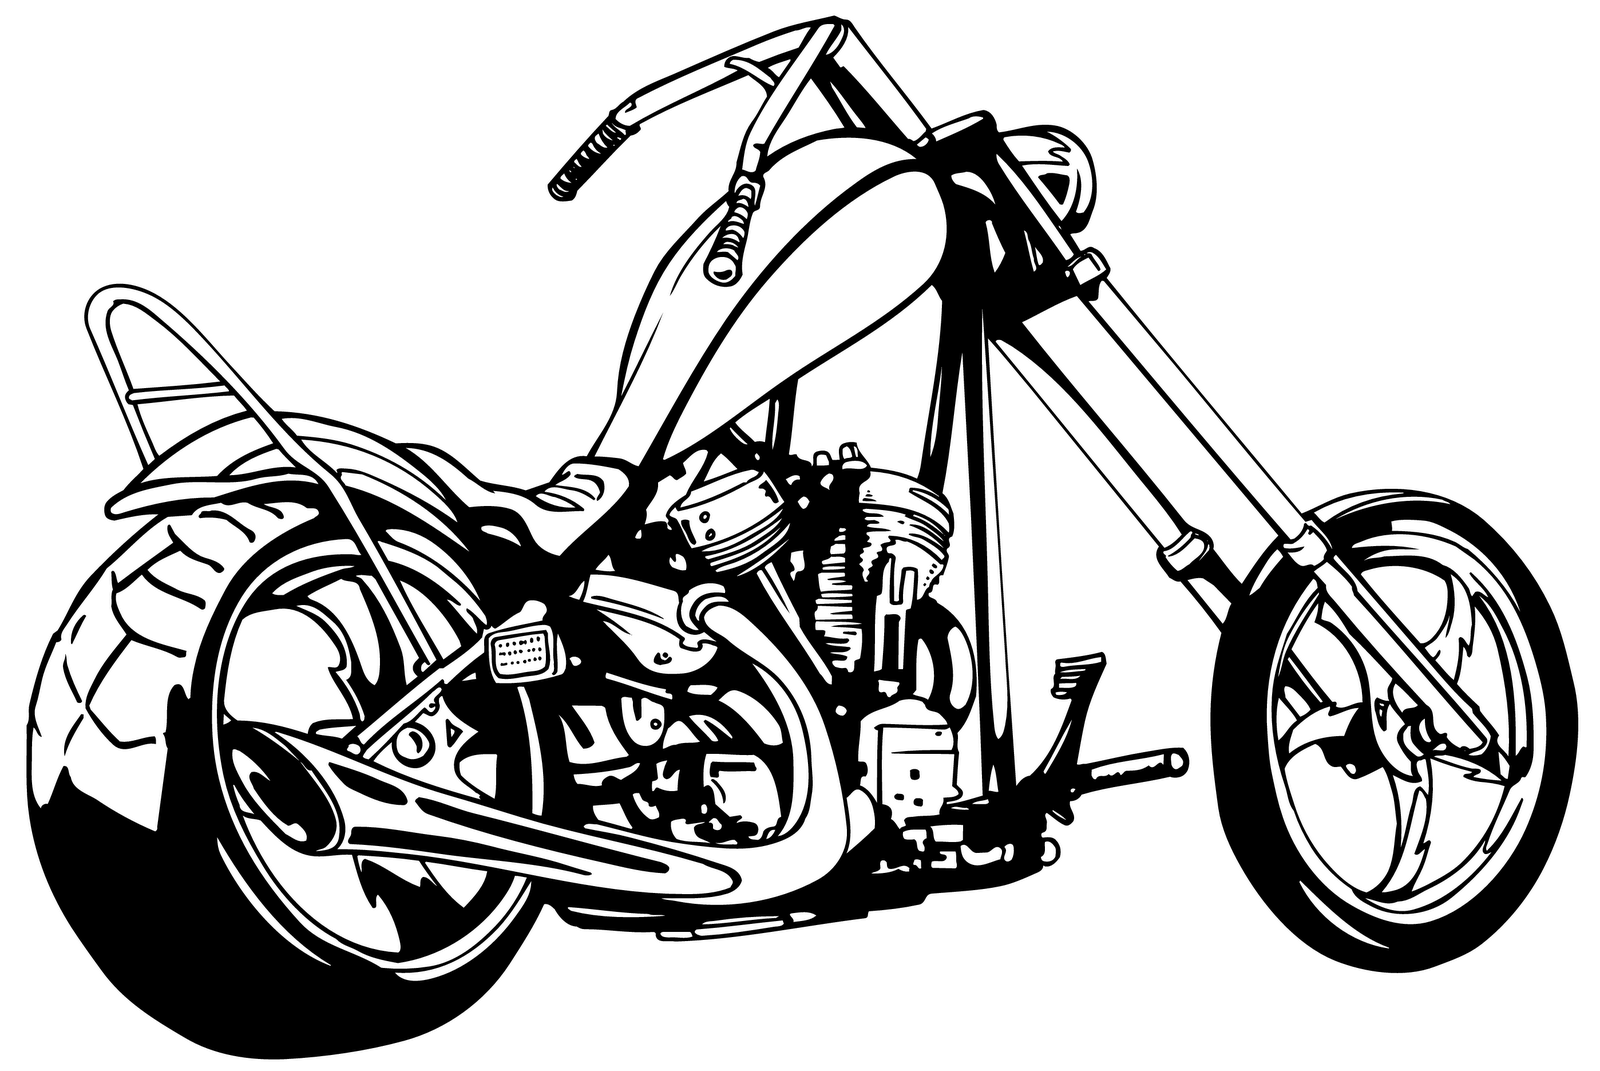 free animated motorcycle clipart - photo #45